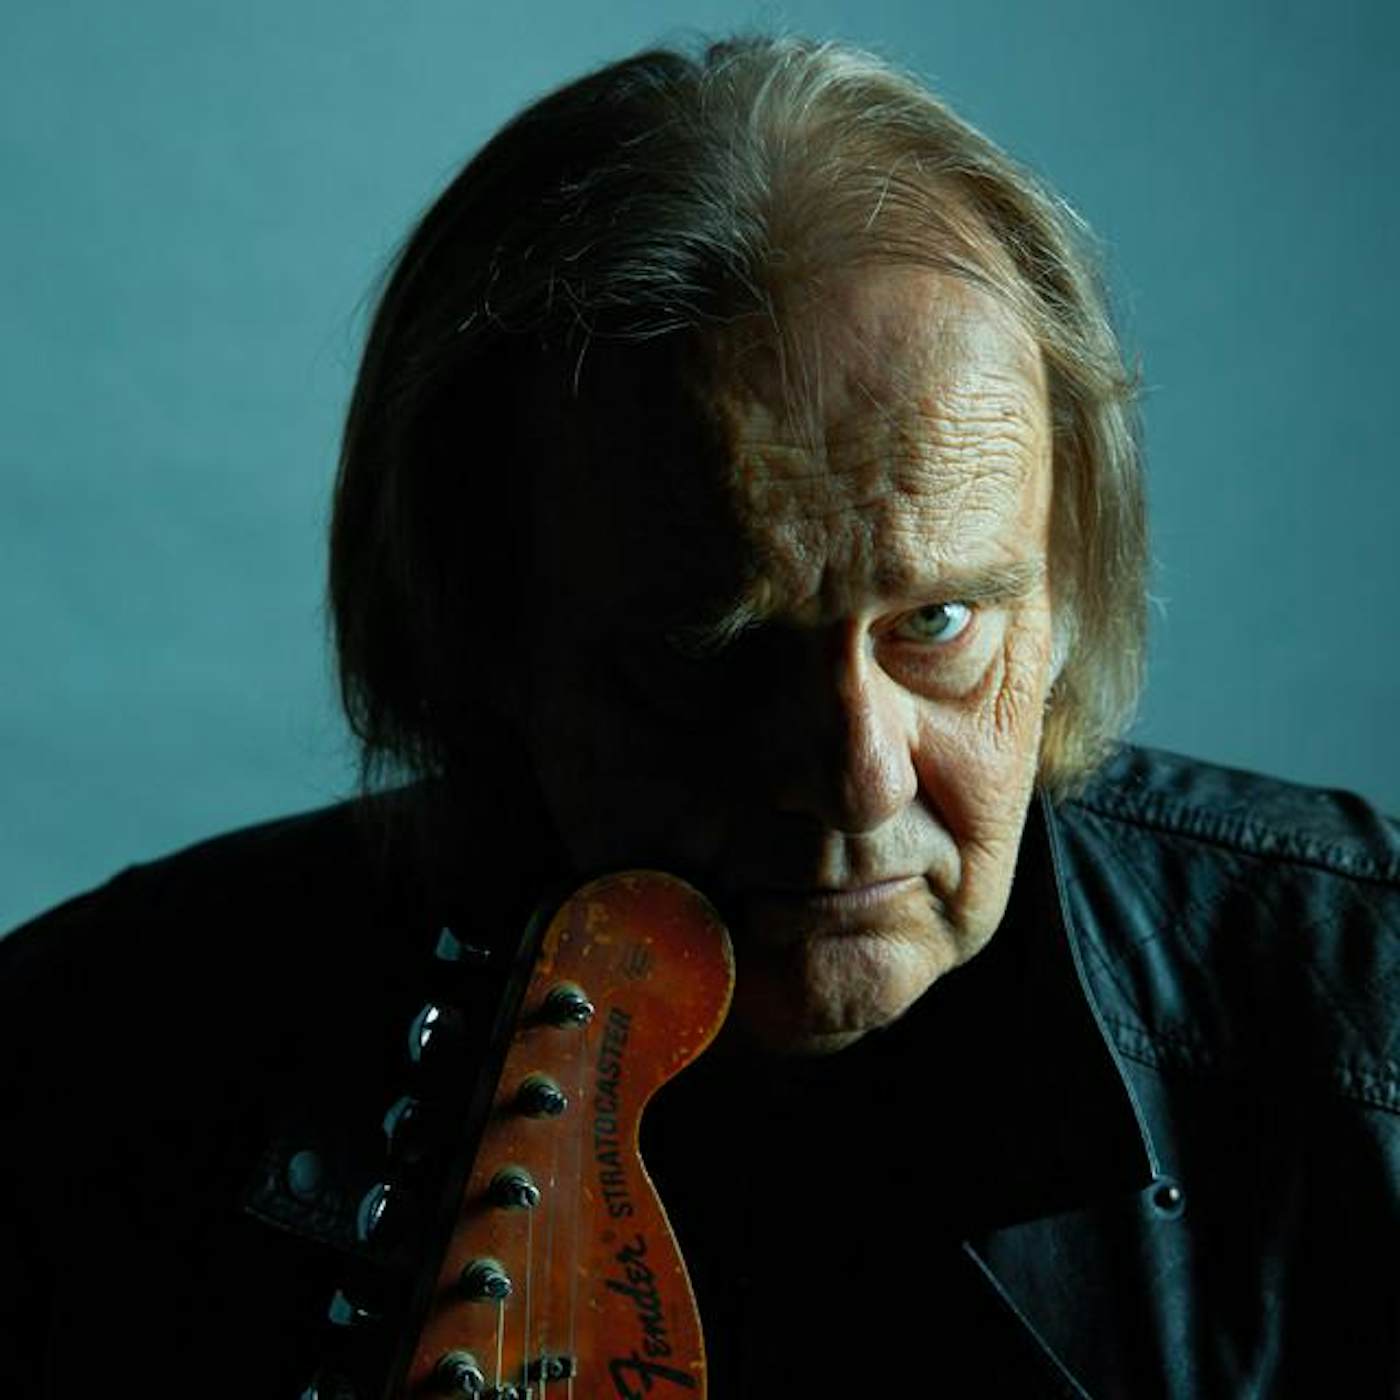 Walter Trout